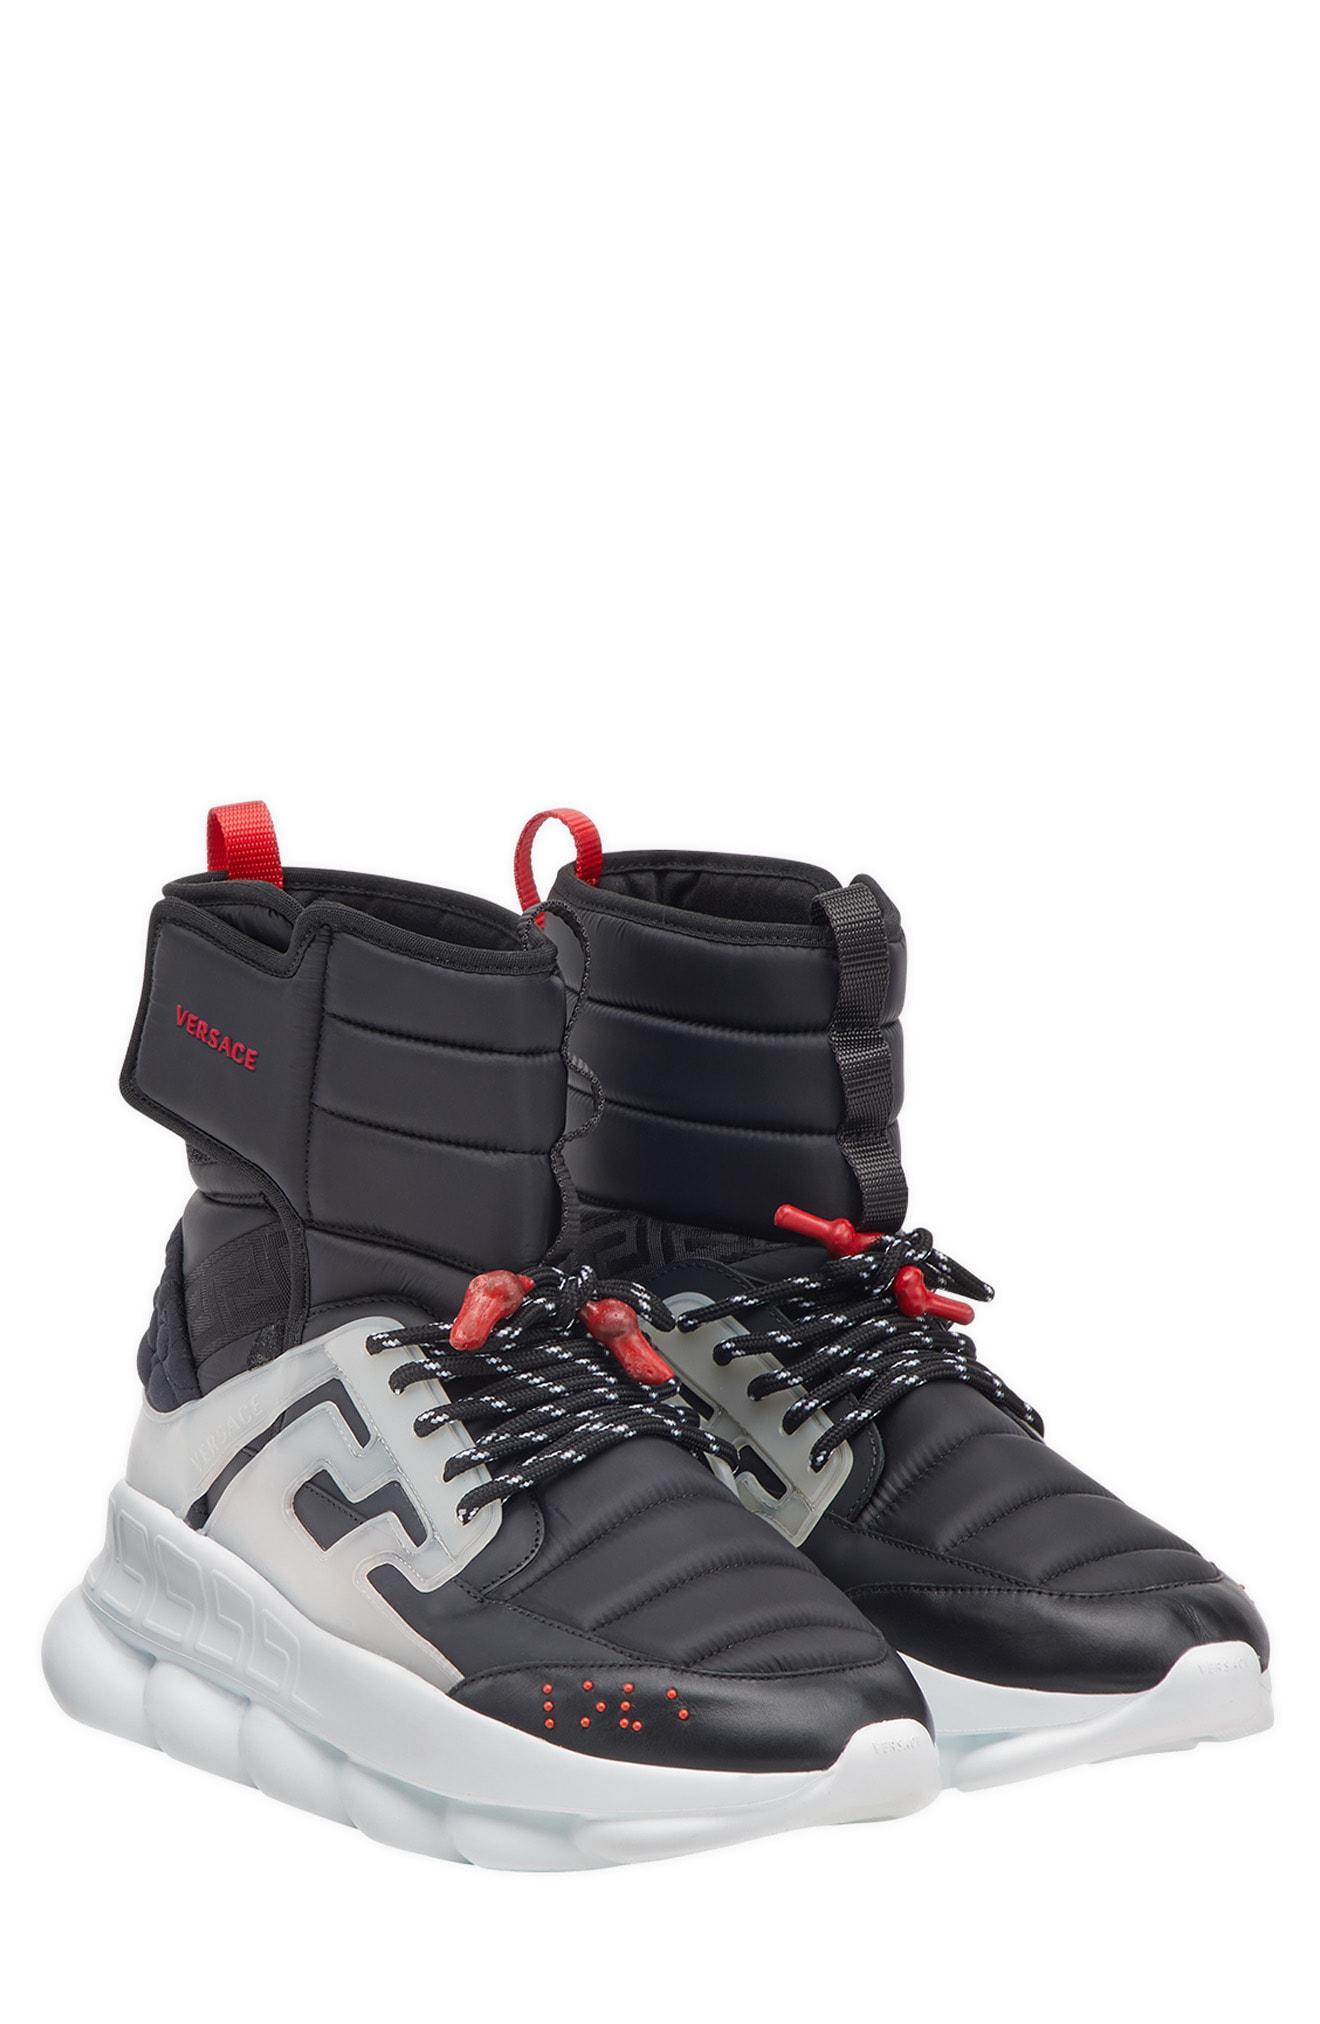 chain reaction sneaker boots